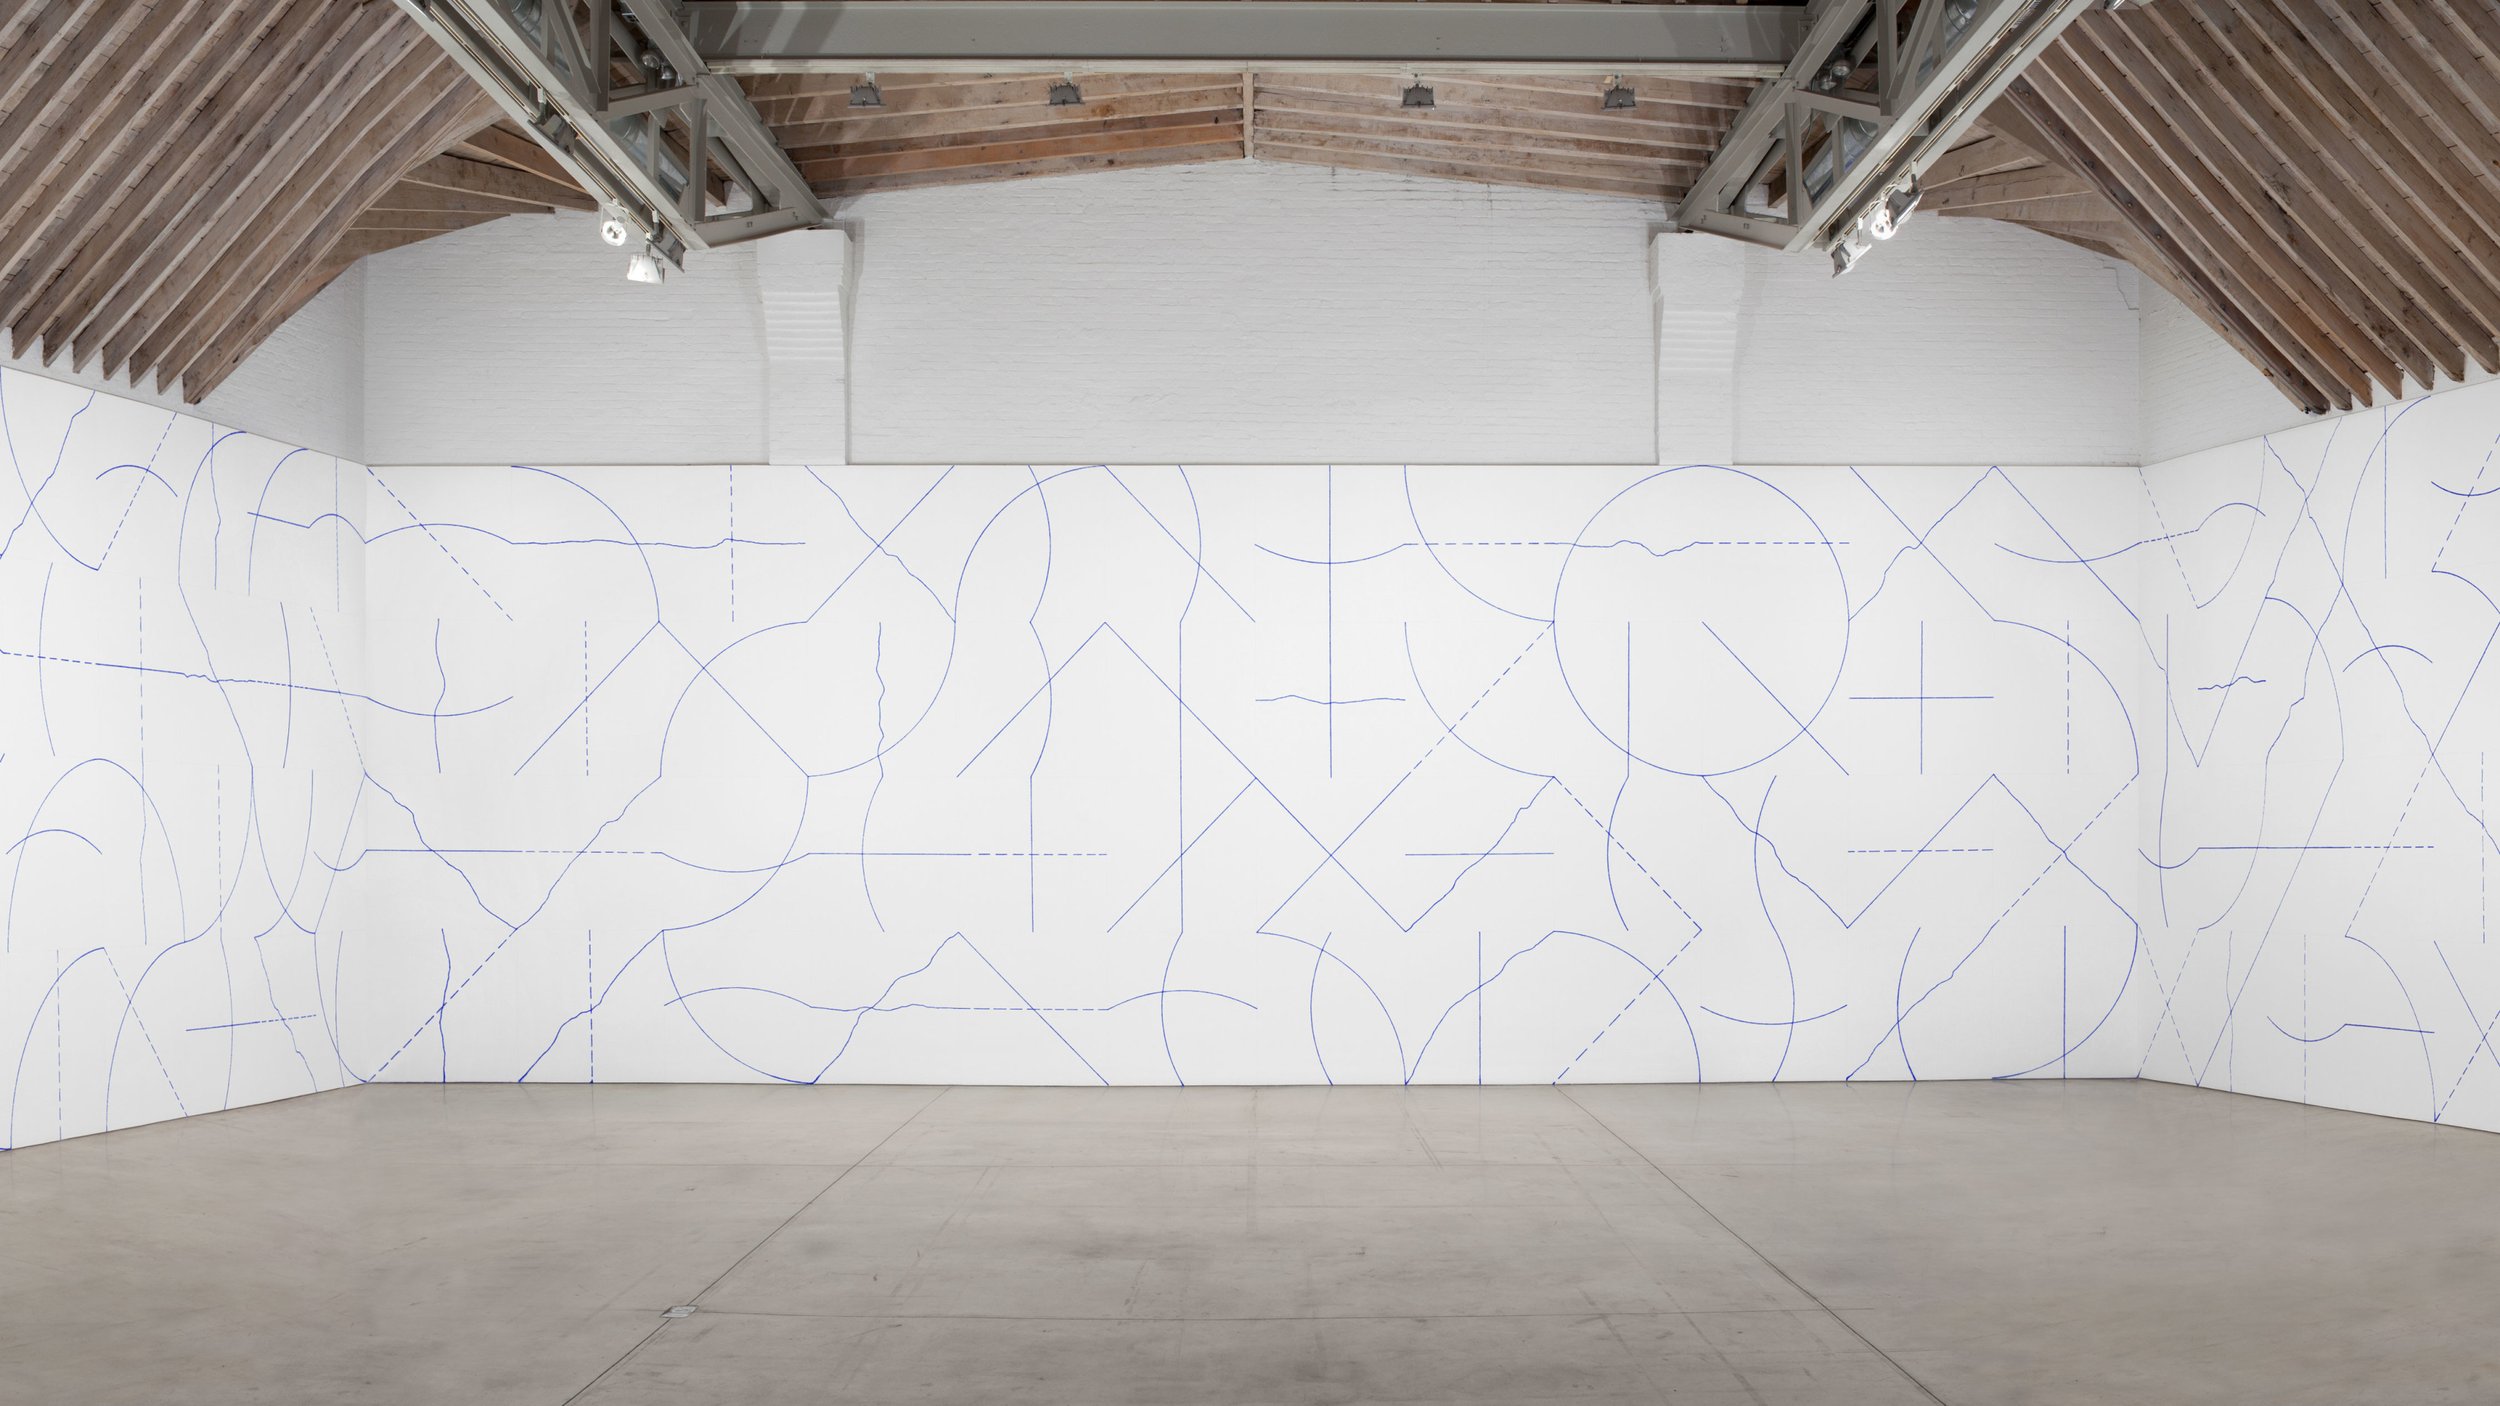 Installation view, Sol LeWitt, Arcs and Lines, May 7th - August 26th 2011, The Paula Cooper Gallery